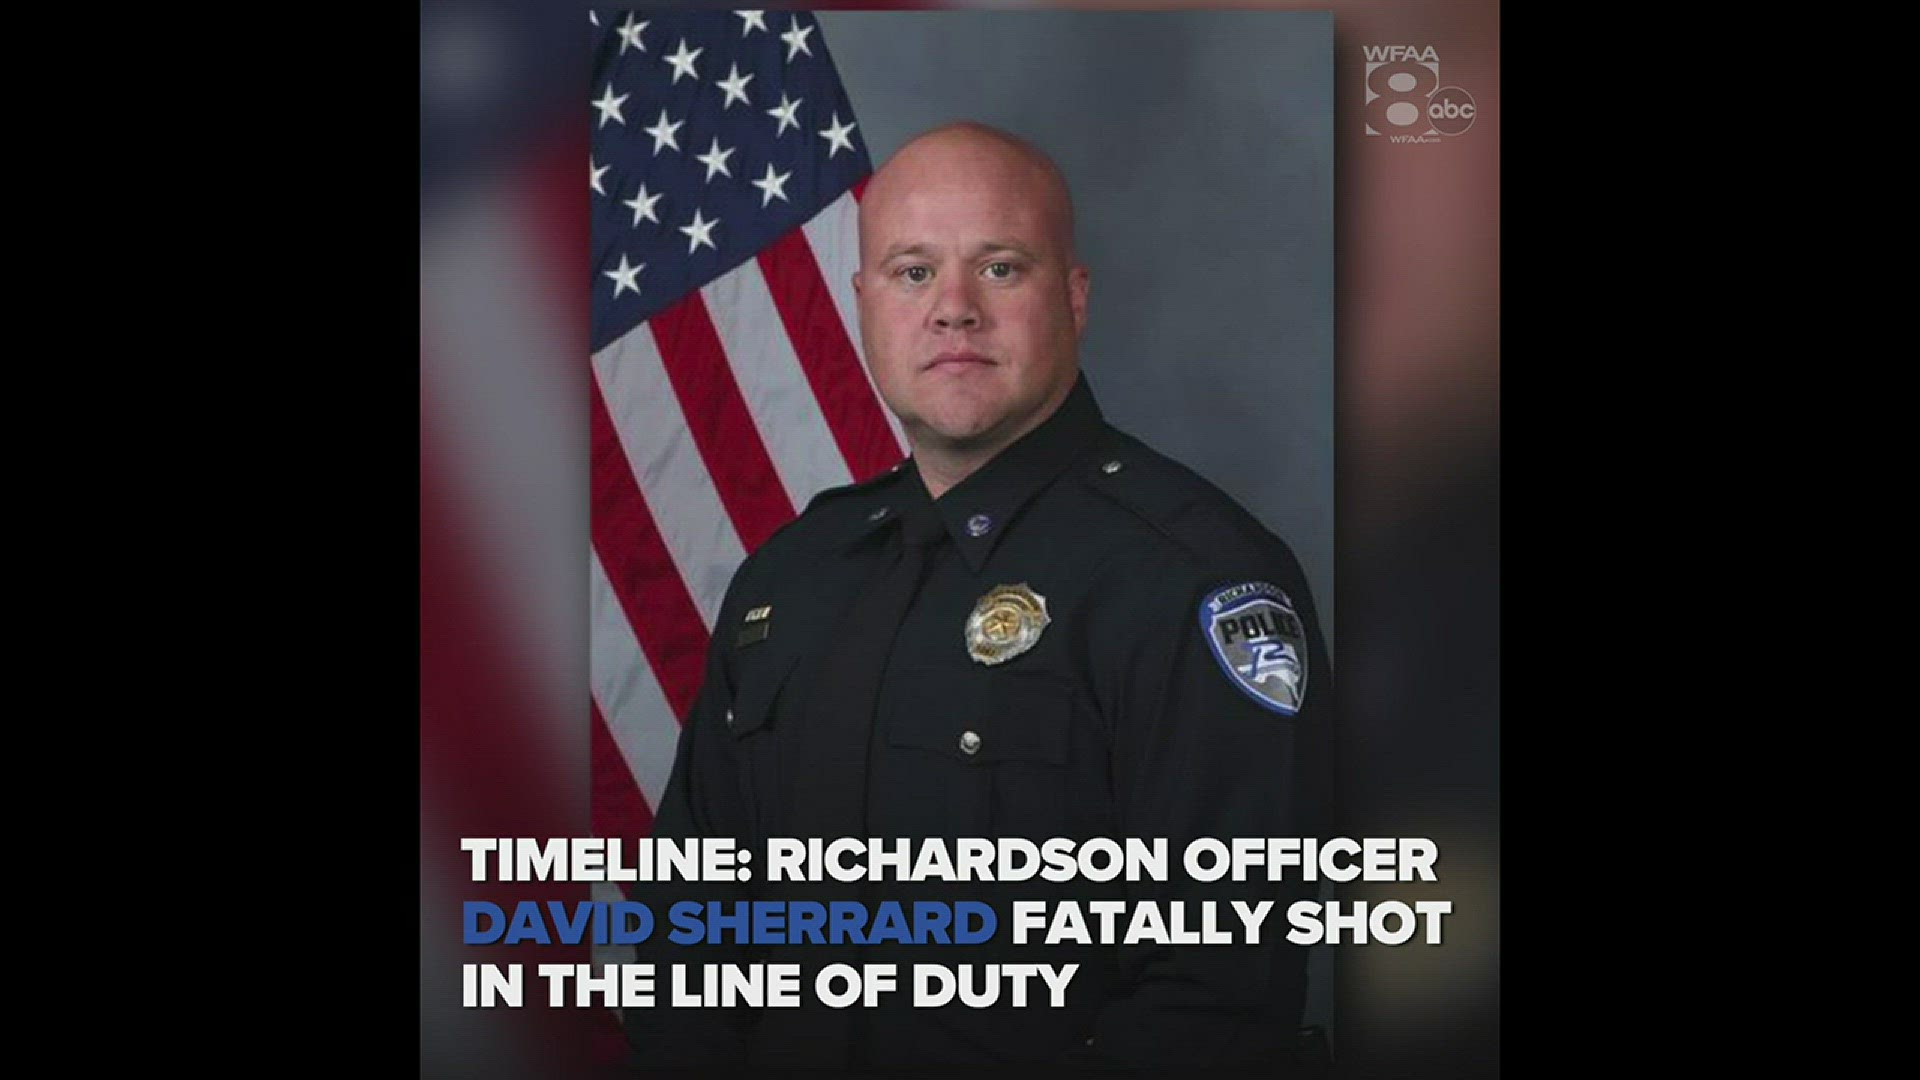 Richardson police officer David Sherrard became the first RPD officer killed in the line of duty when he was gunned down in an apartment complex standoff Wednesday. WFAA.com